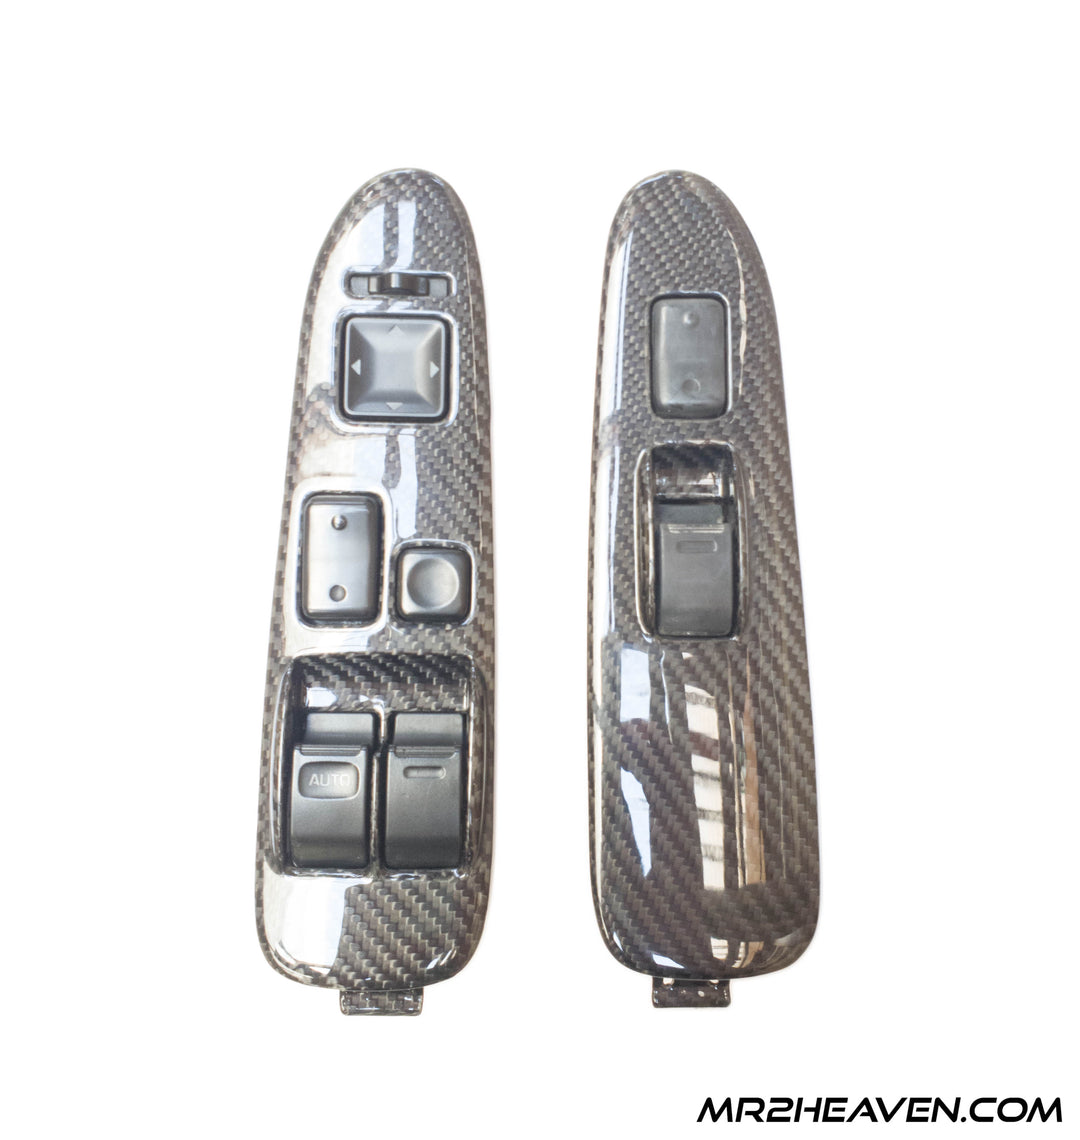 MR2Heaven Full Pre-Preg/Dry Carbon Fiber Complete Replacement Interior Trim - #7 and #8 - Window Switch Trims (LHD)